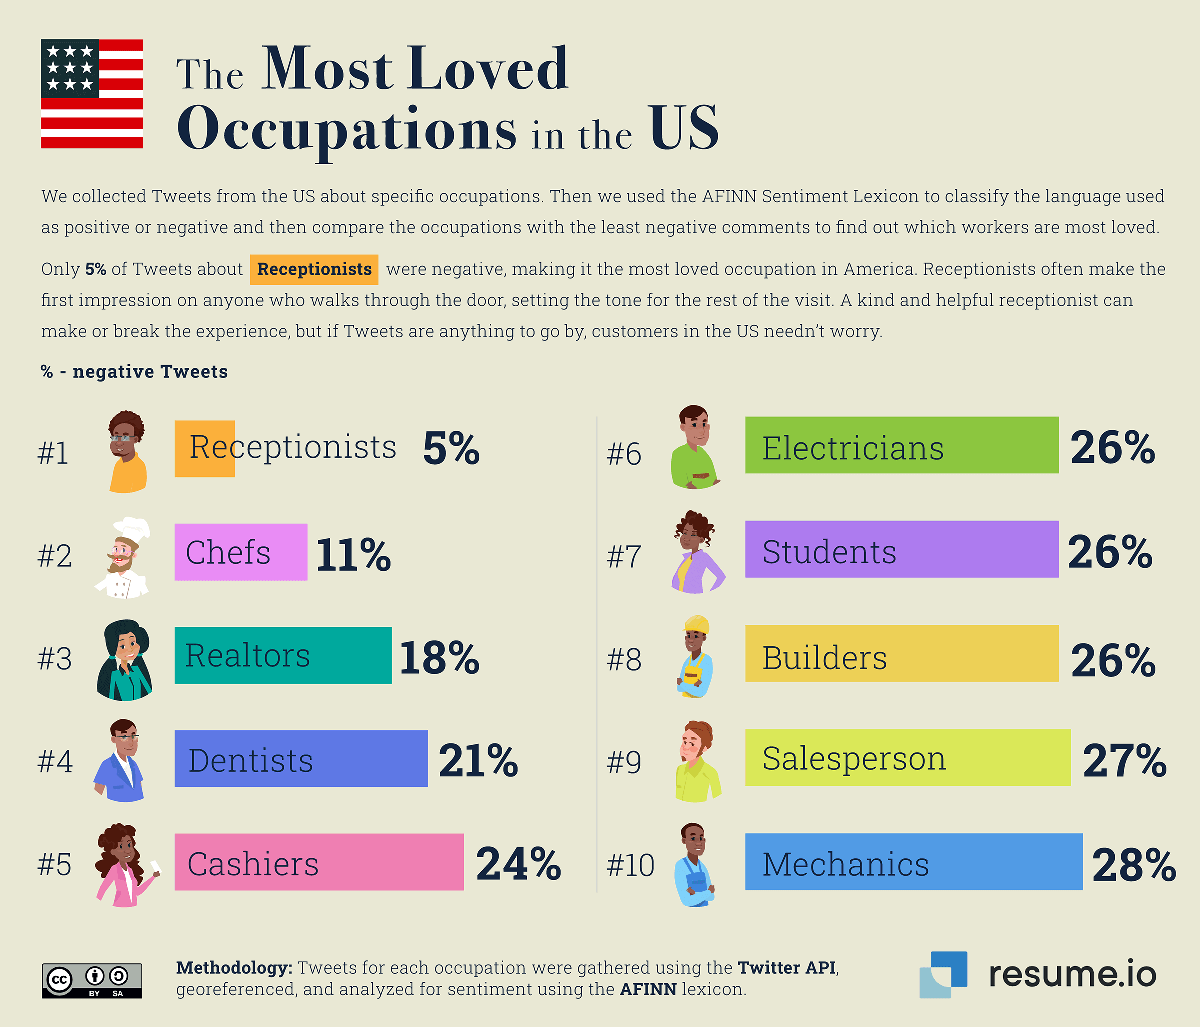 The most loved occupations in the US.